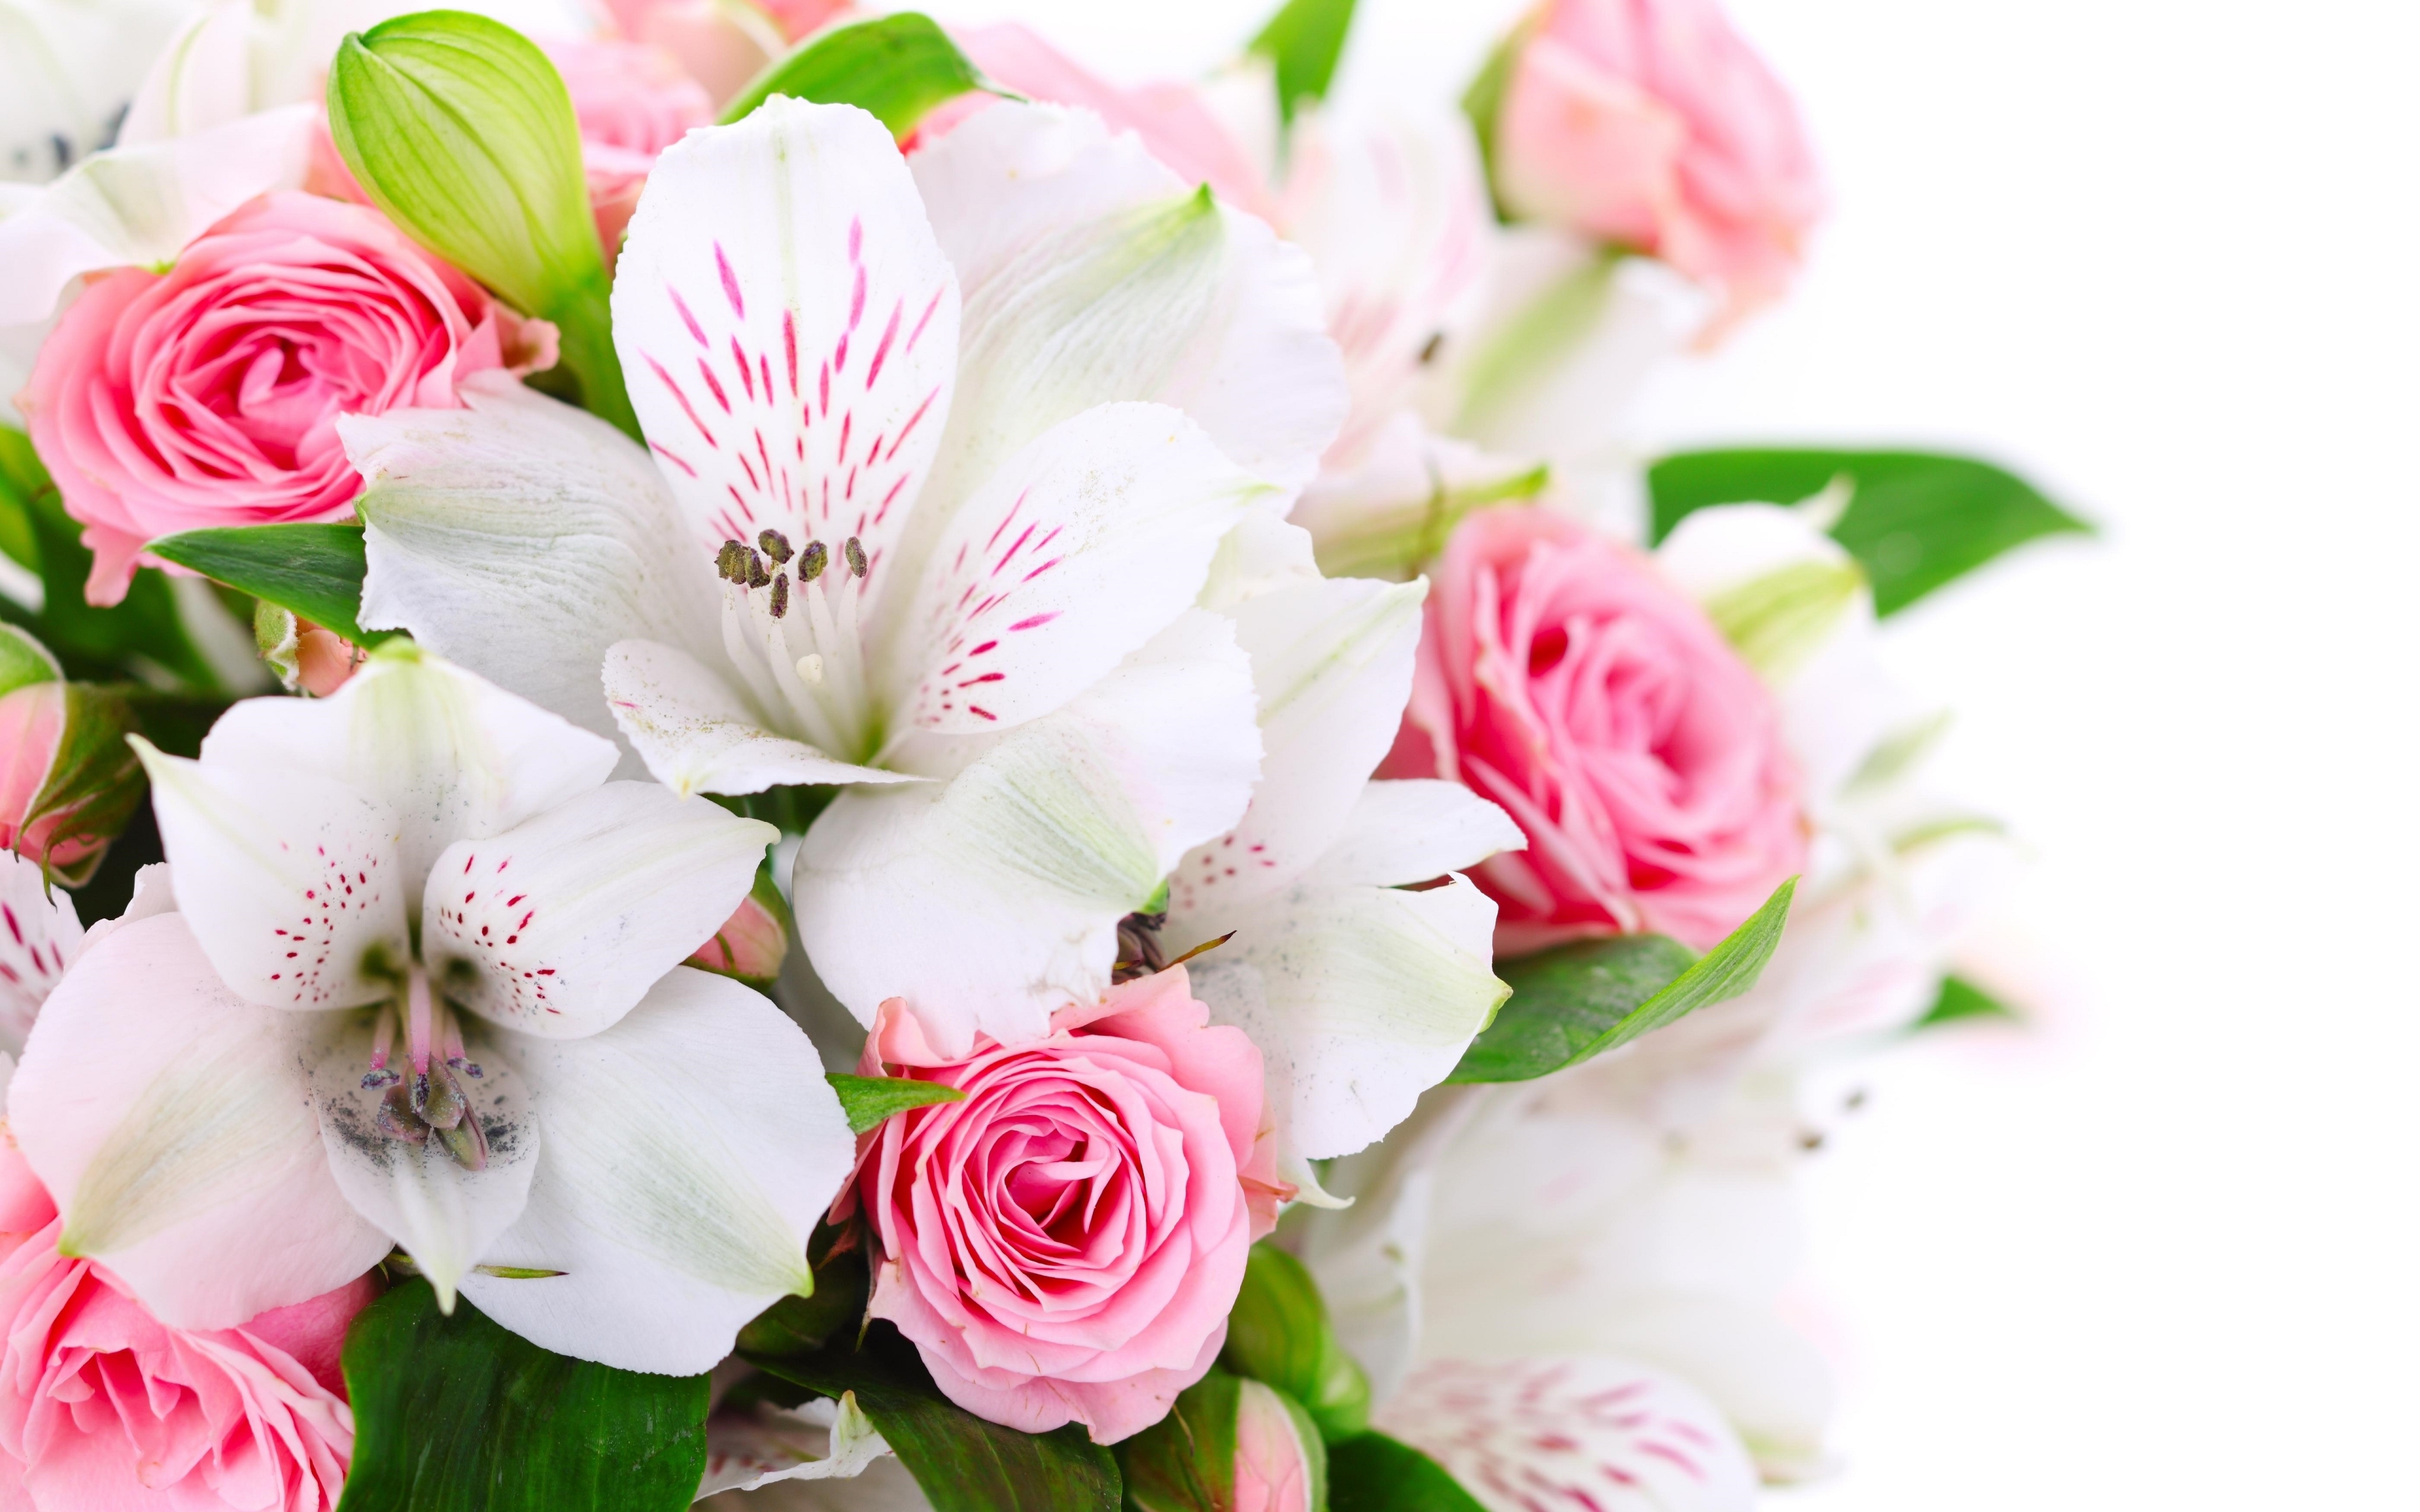 Pink Roses and White Lilies  for 3840 x 2400 4K Retina Display resolution